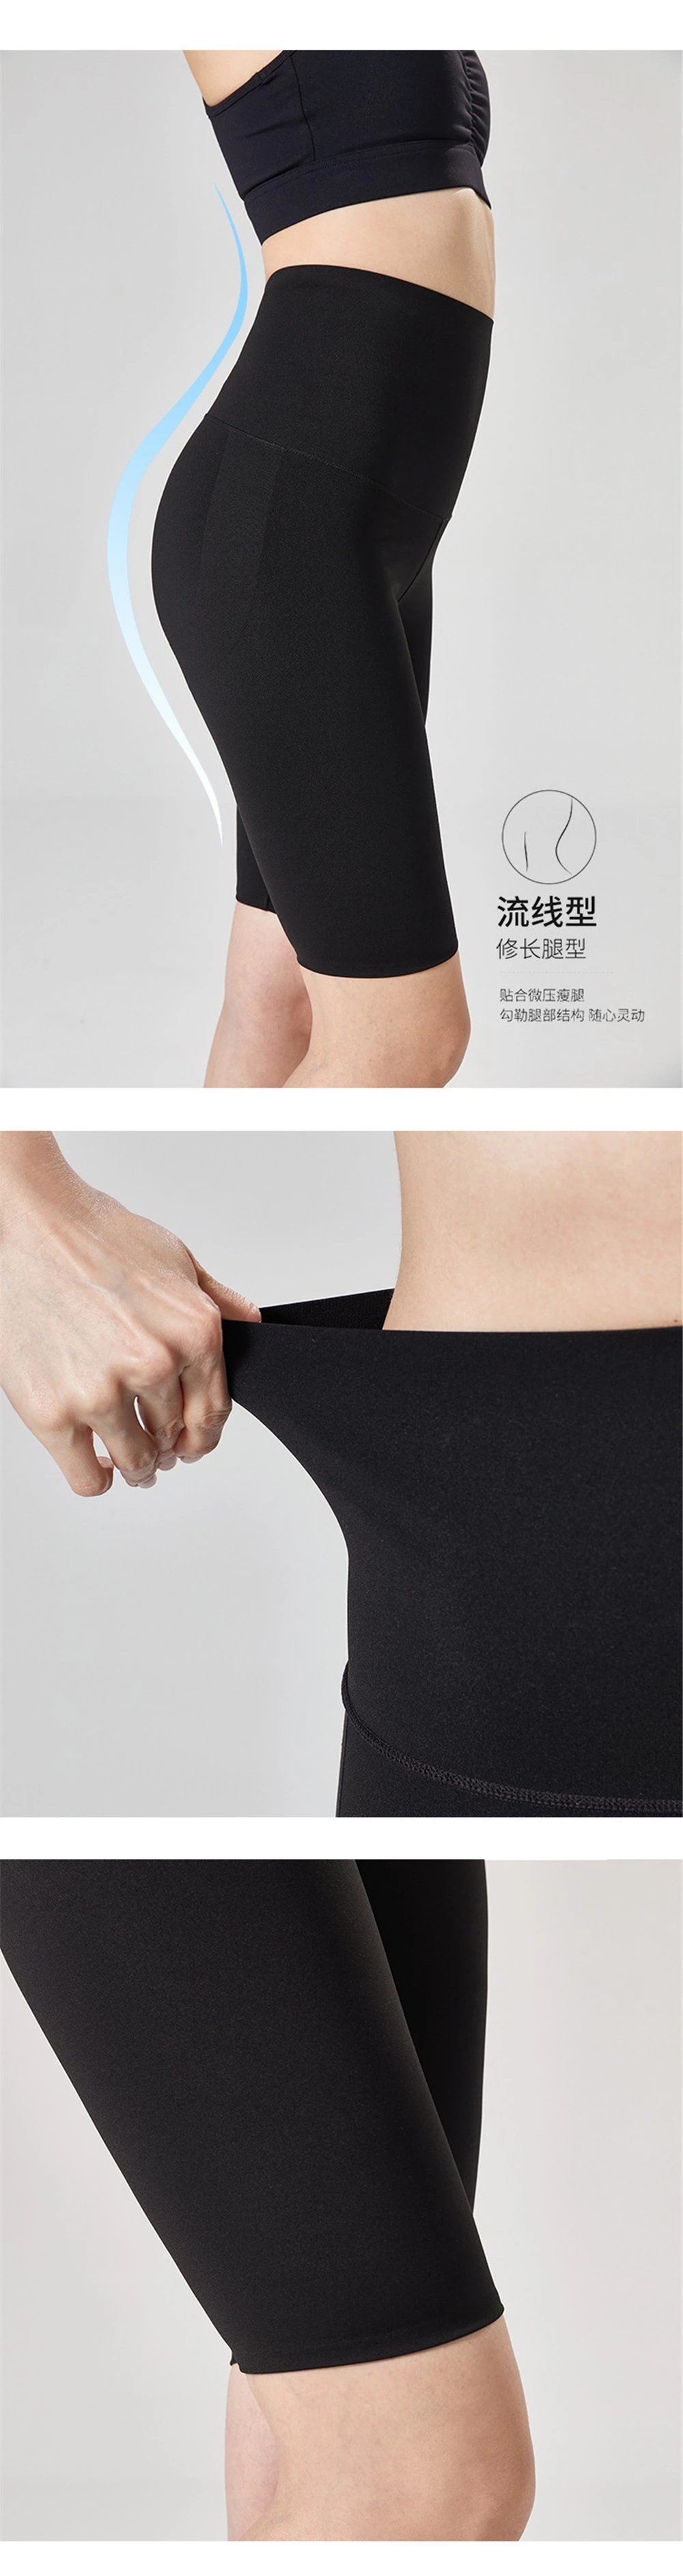 Women&prime;s High Waist Shorts Workout Yoga Running Gym Compression Shorts Lifting Elastic Tights Pants